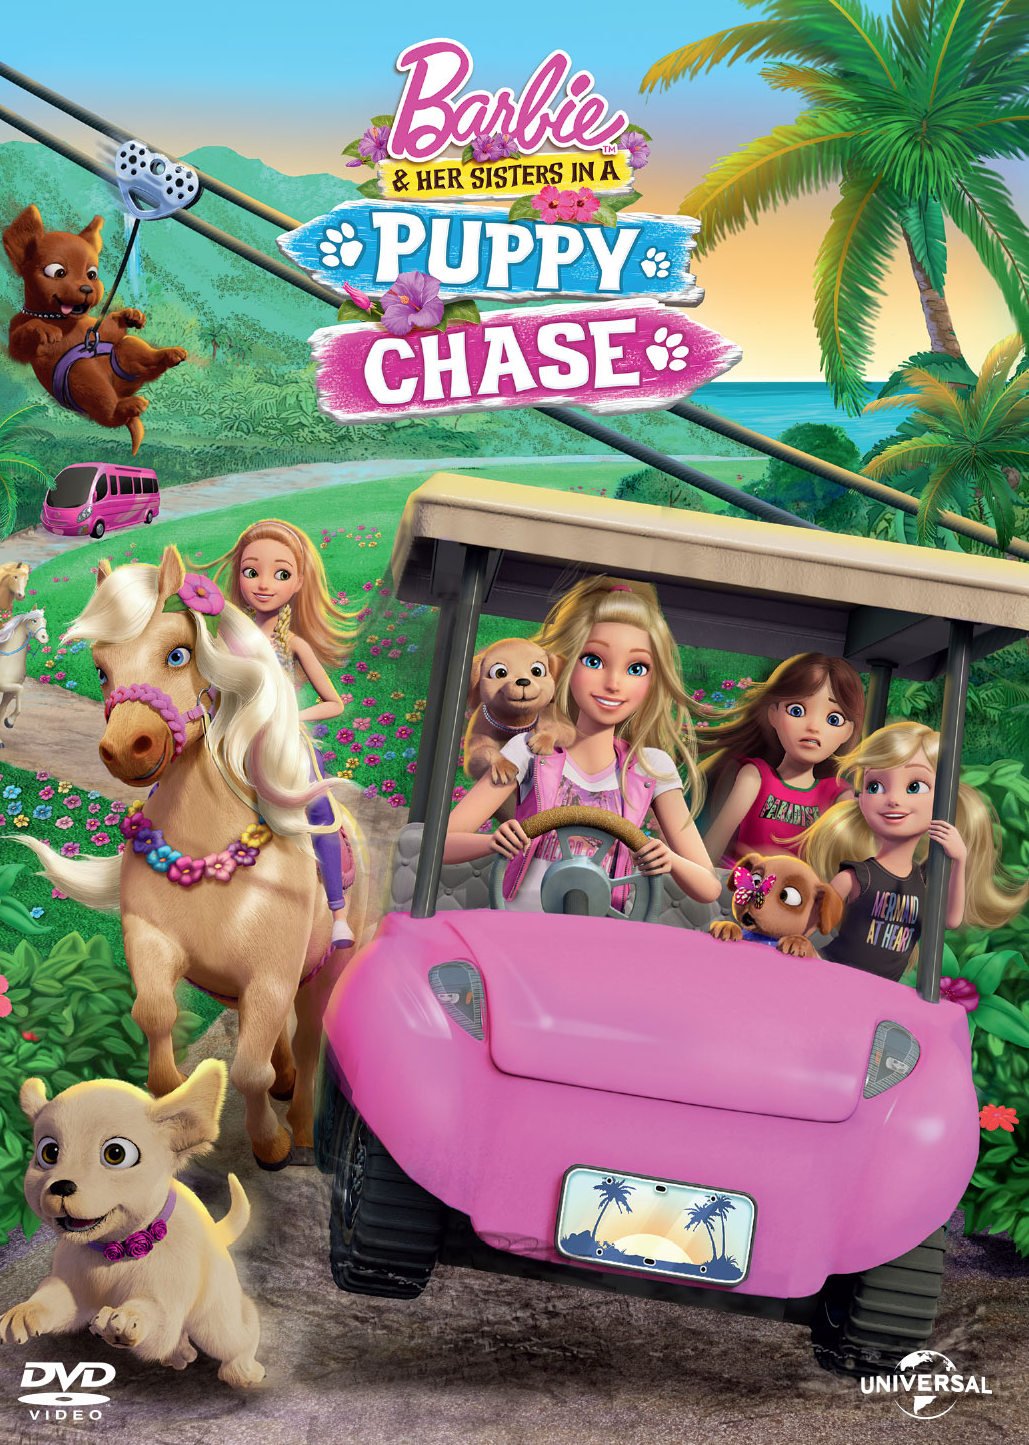 barbie-her-sisters-in-a-puppy-chase-movie-purchase-or-watch-online